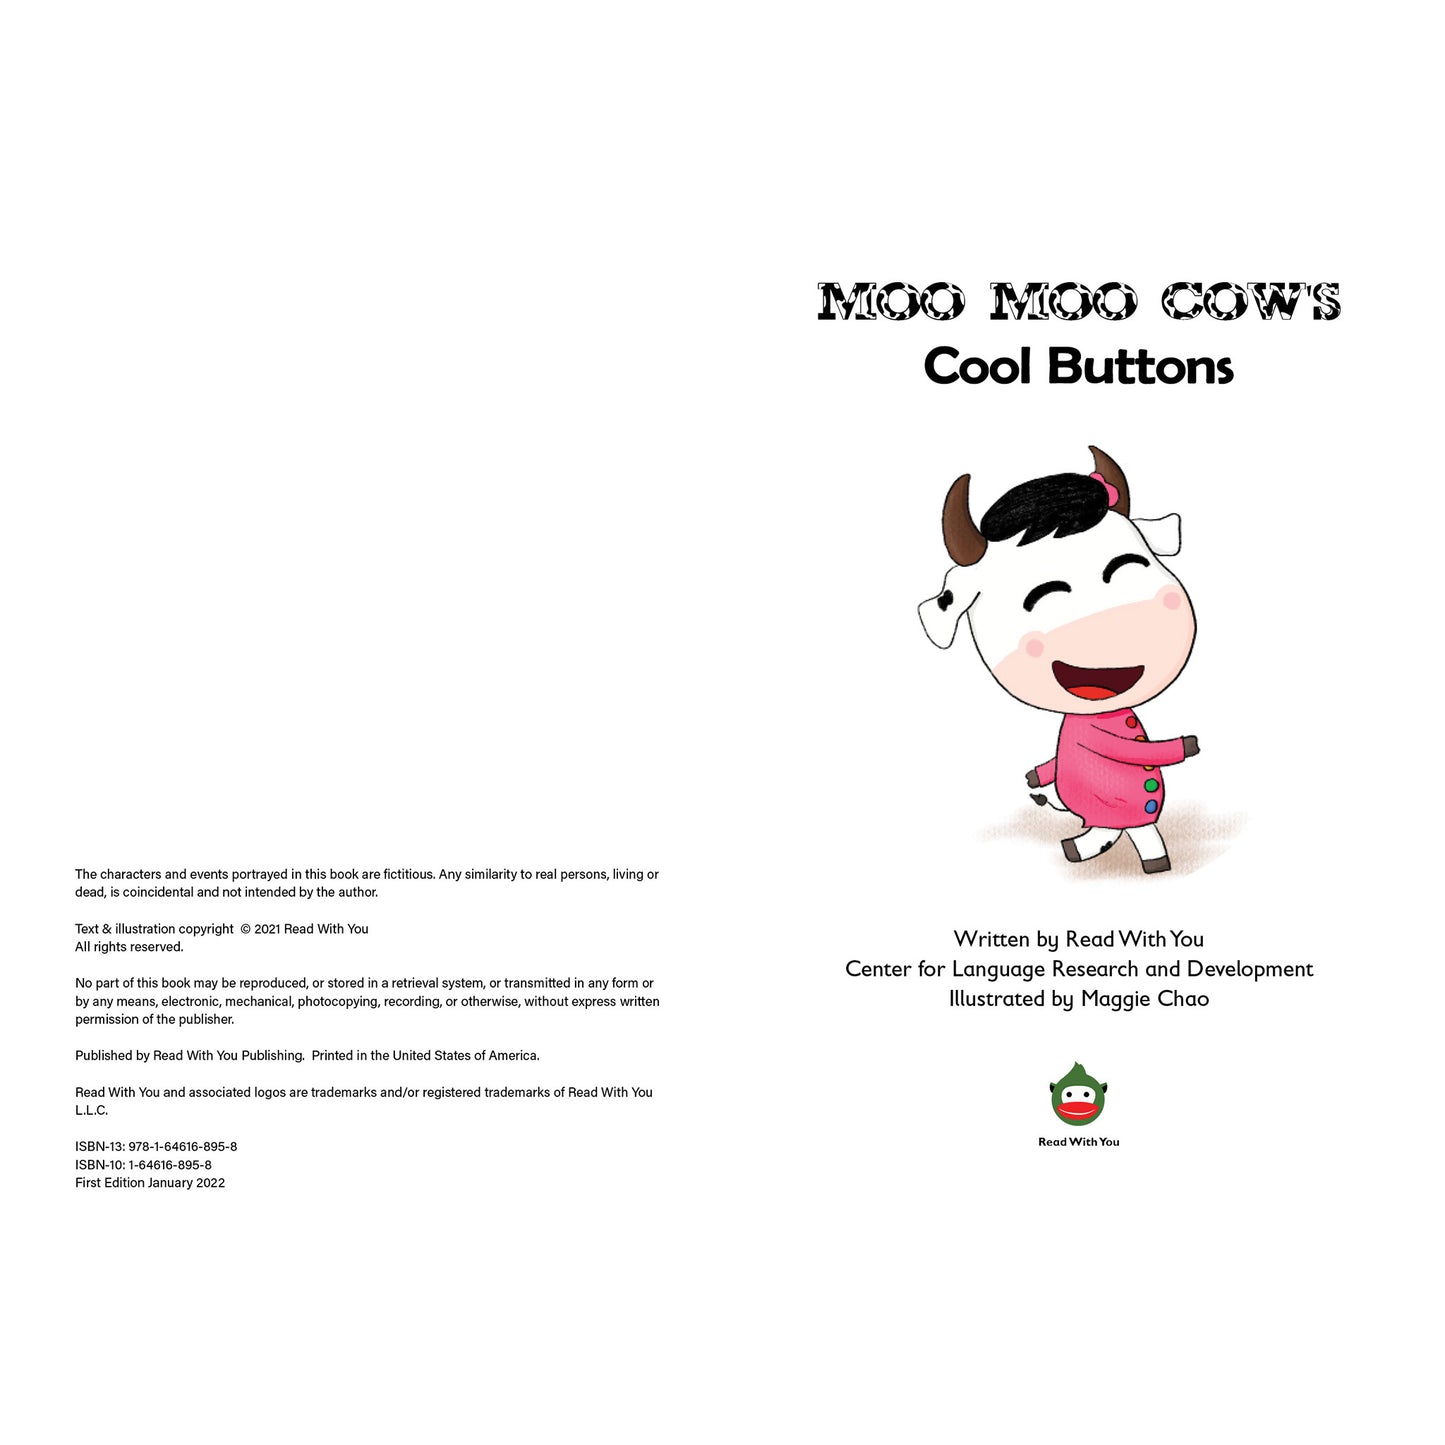 Moo Moo Cow's Cool Buttons